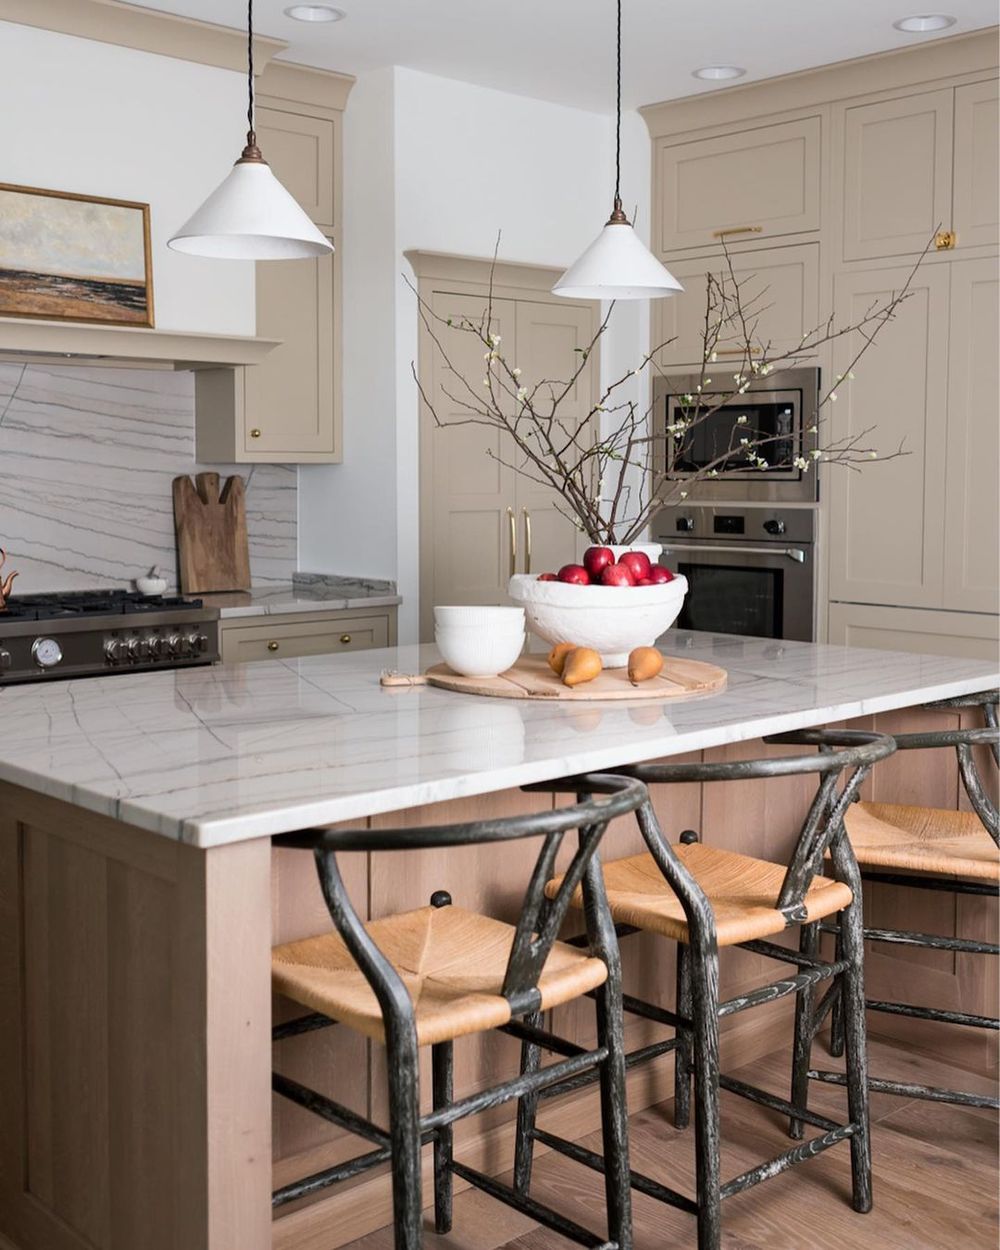 Neutral Kitchen With Treebranch Centerpiece And Wishbone Counter Chairs And Beige Cabinets Via @whittneyparkinson 